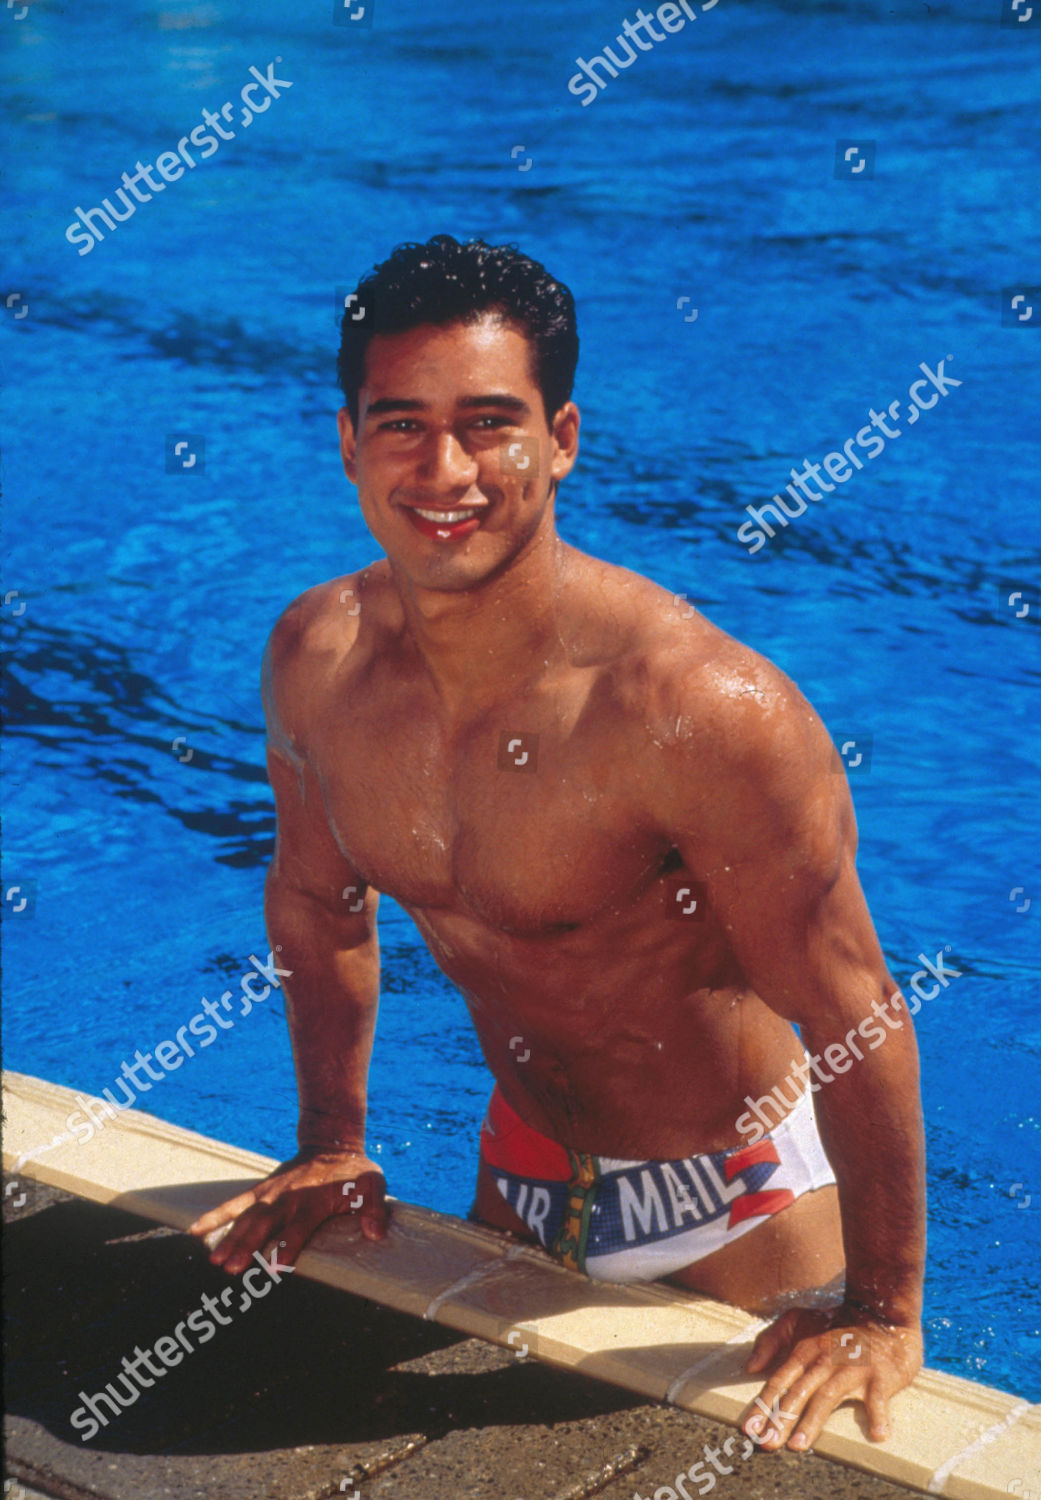 breaking the surface the greg louganis story